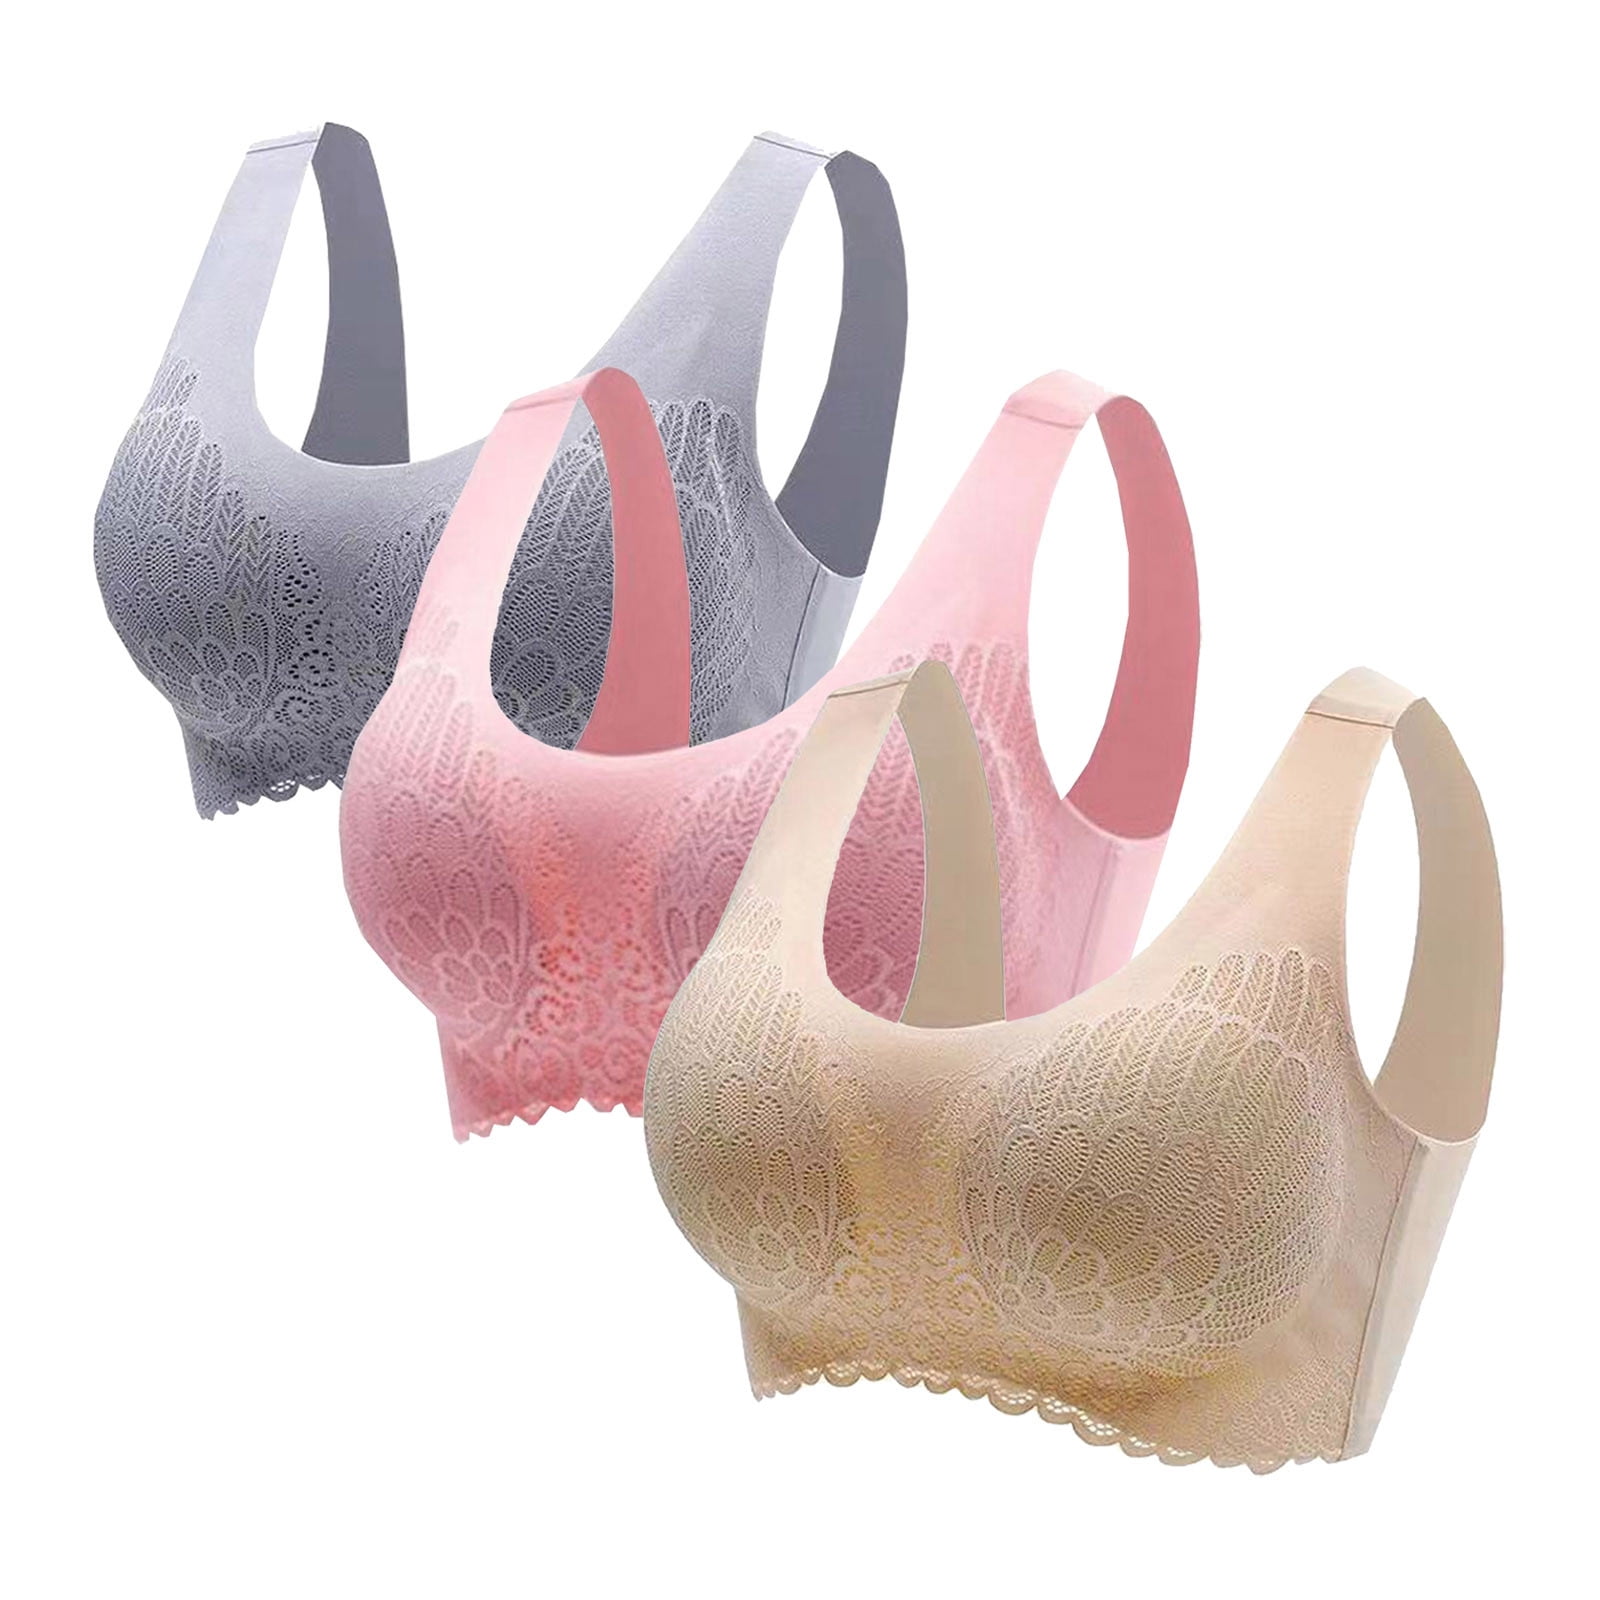 FAFWYP 3-Pack Plus Size Sports Bras for Women, Large Bust High Impact ...